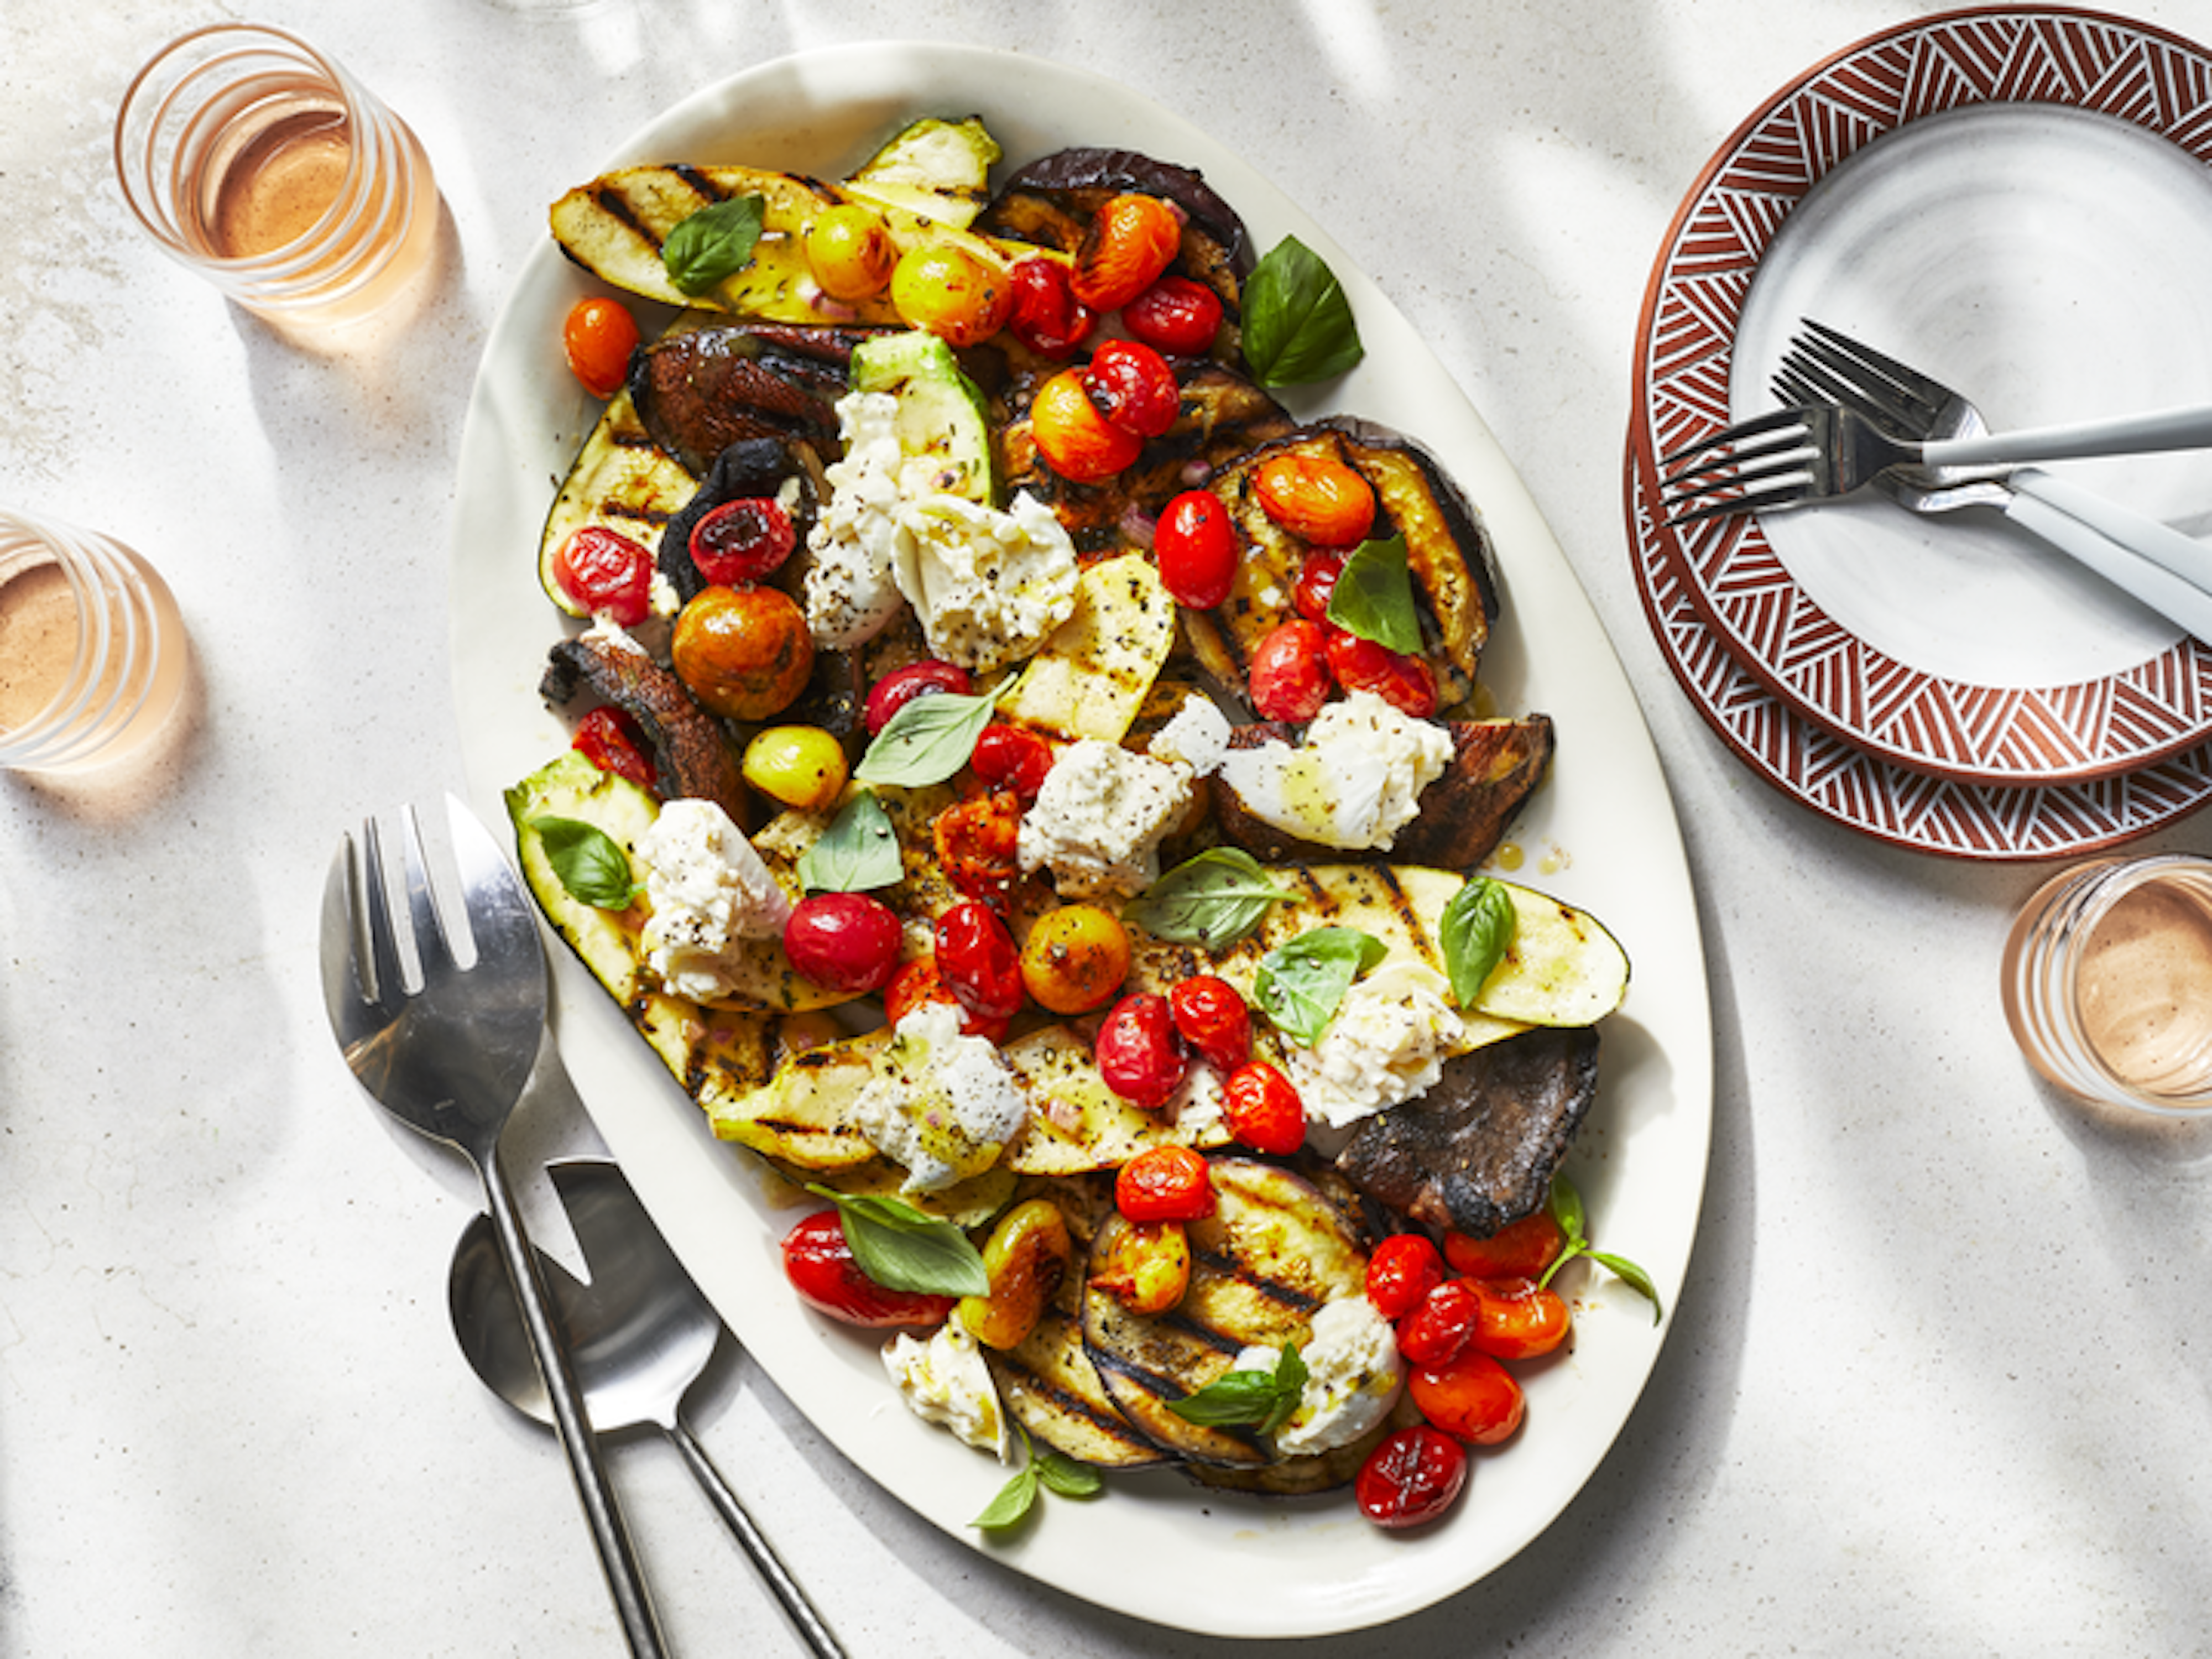 https://static.onecms.io/wp-content/uploads/sites/19/2020/07/20/grilled_vegetables_for_burrata_2393_720.png